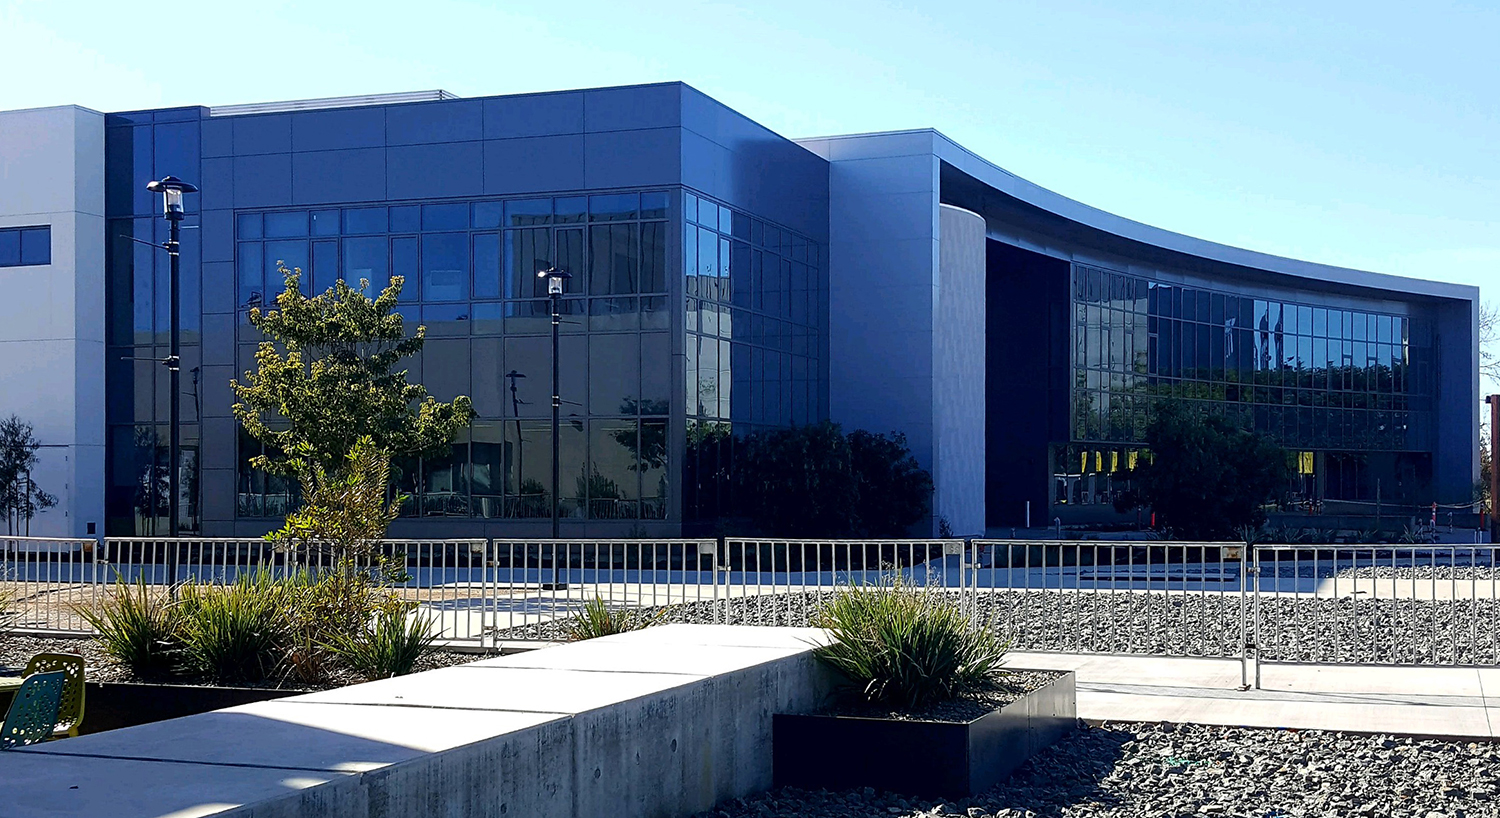 Mesa College's Center for Business and Technology